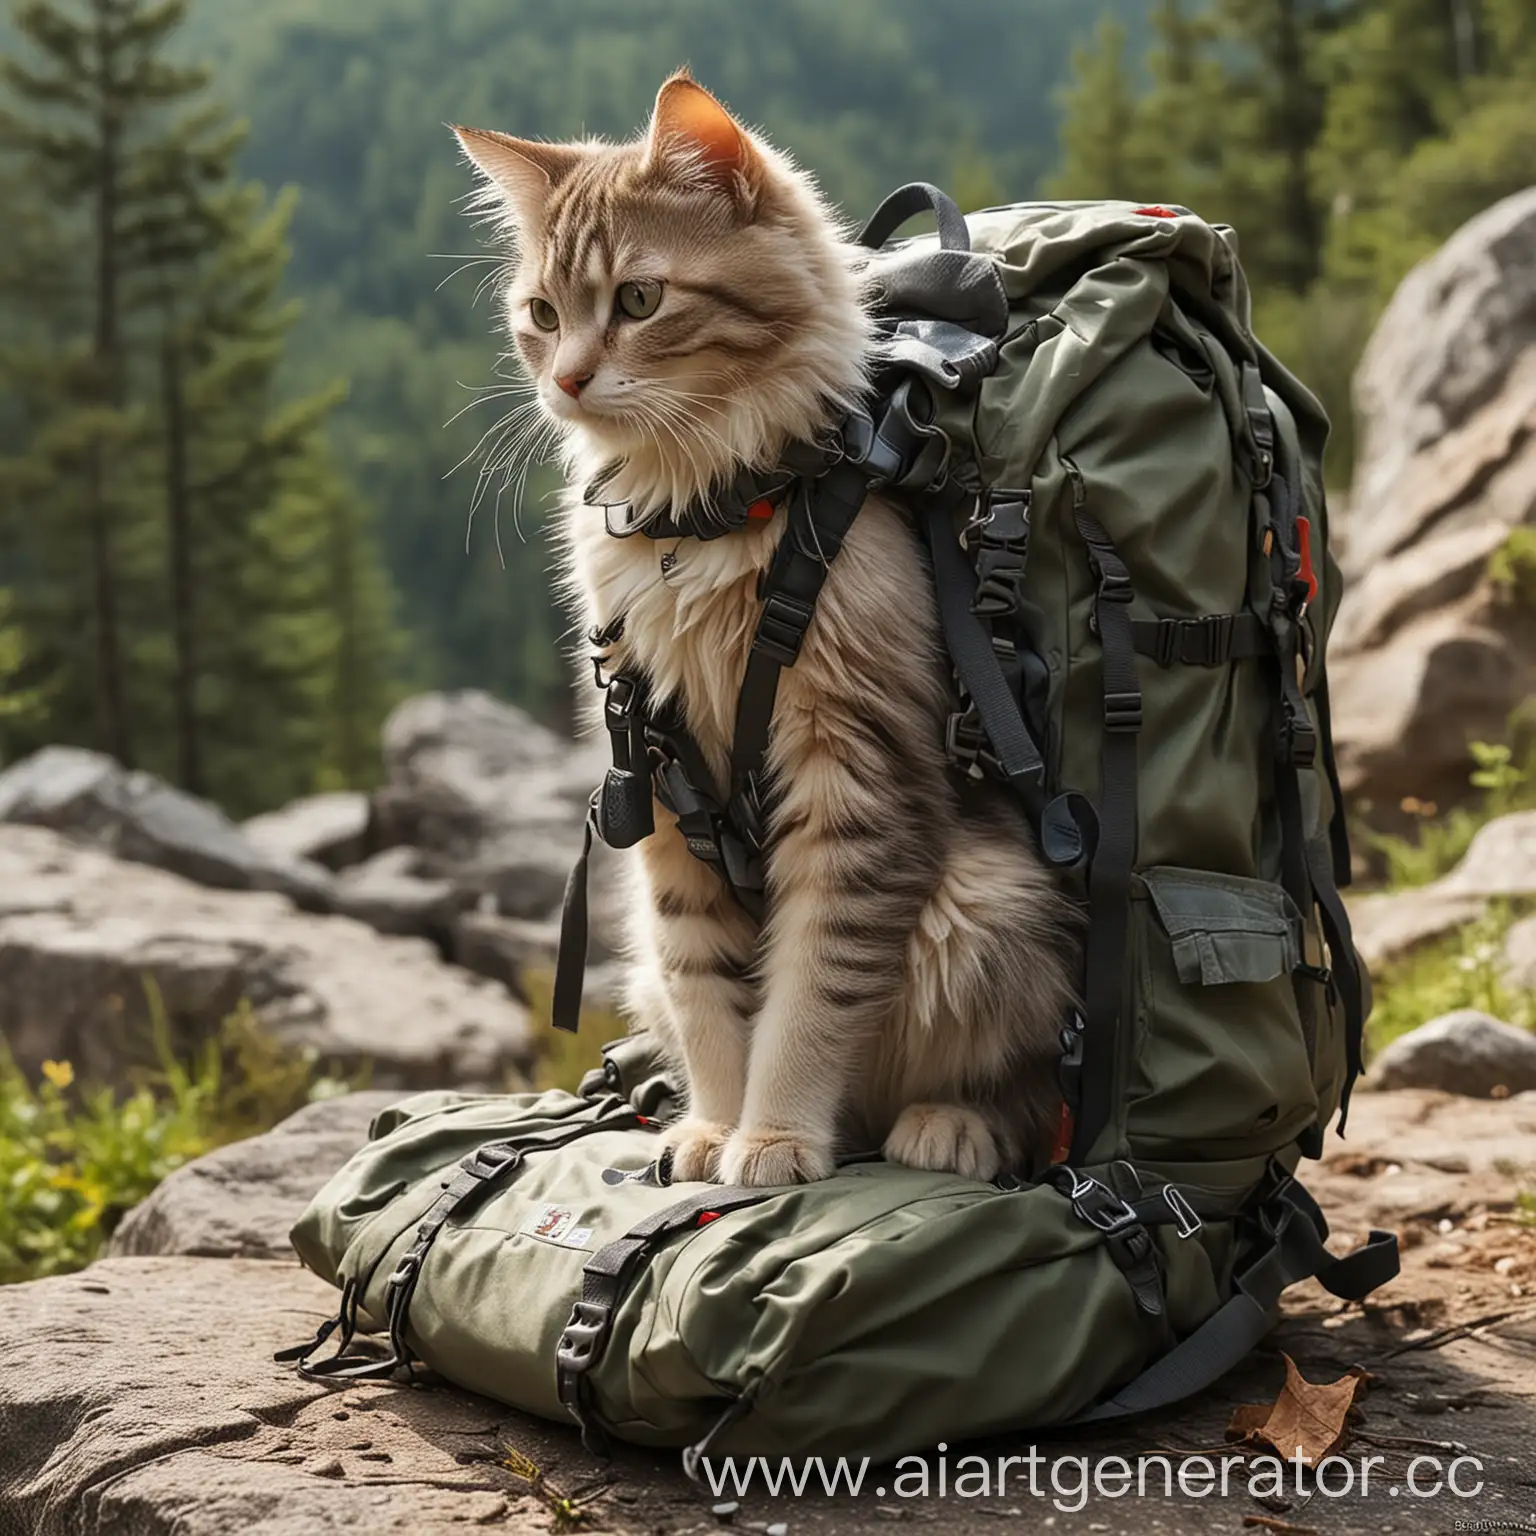 Adorable-Kitty-Packing-Hiking-Backpack-for-Outdoor-Adventure